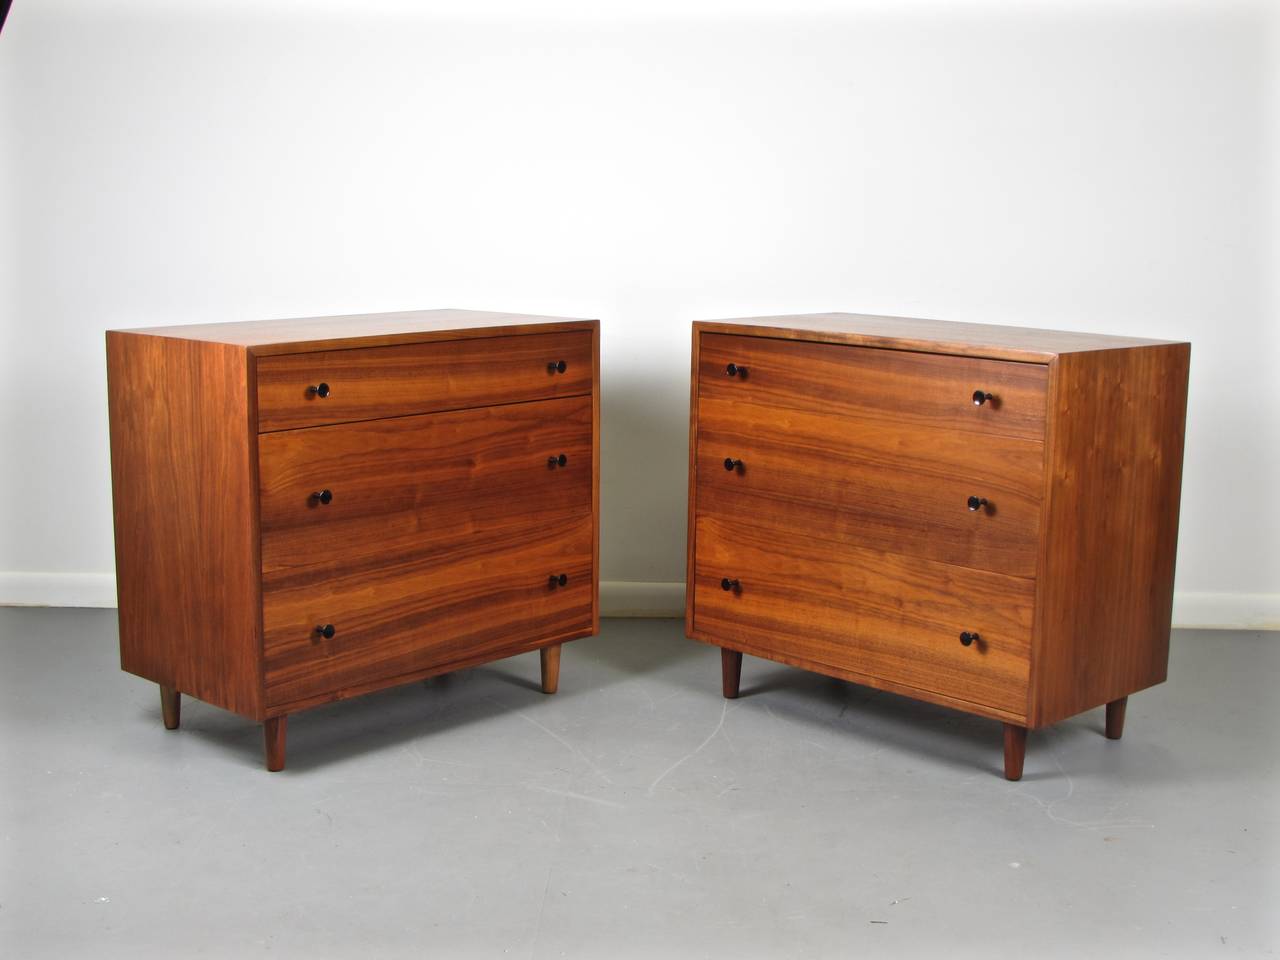 Handsome Pair of Walnut Chests by Milo Baughman for Glenn of California, 1950s 1